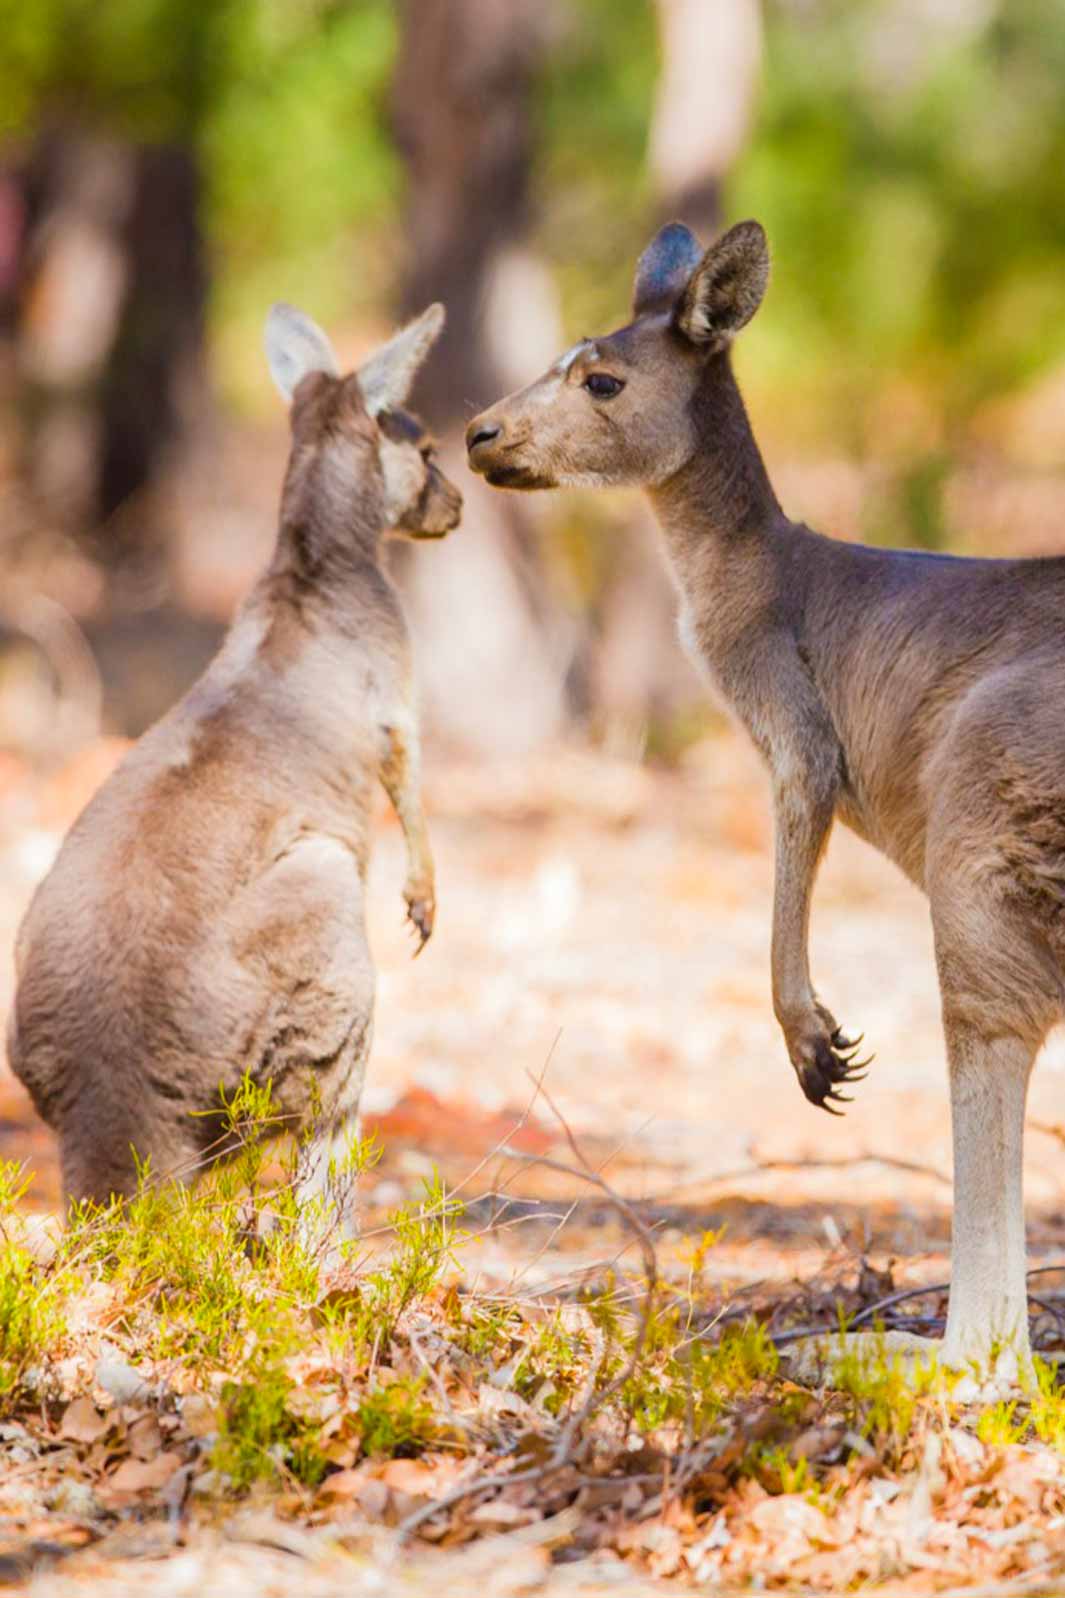 Help support the wildlife like the adorable Kangaroos and Koalas in Australia and donate to the Australian Zoo Wildlife Hospital.